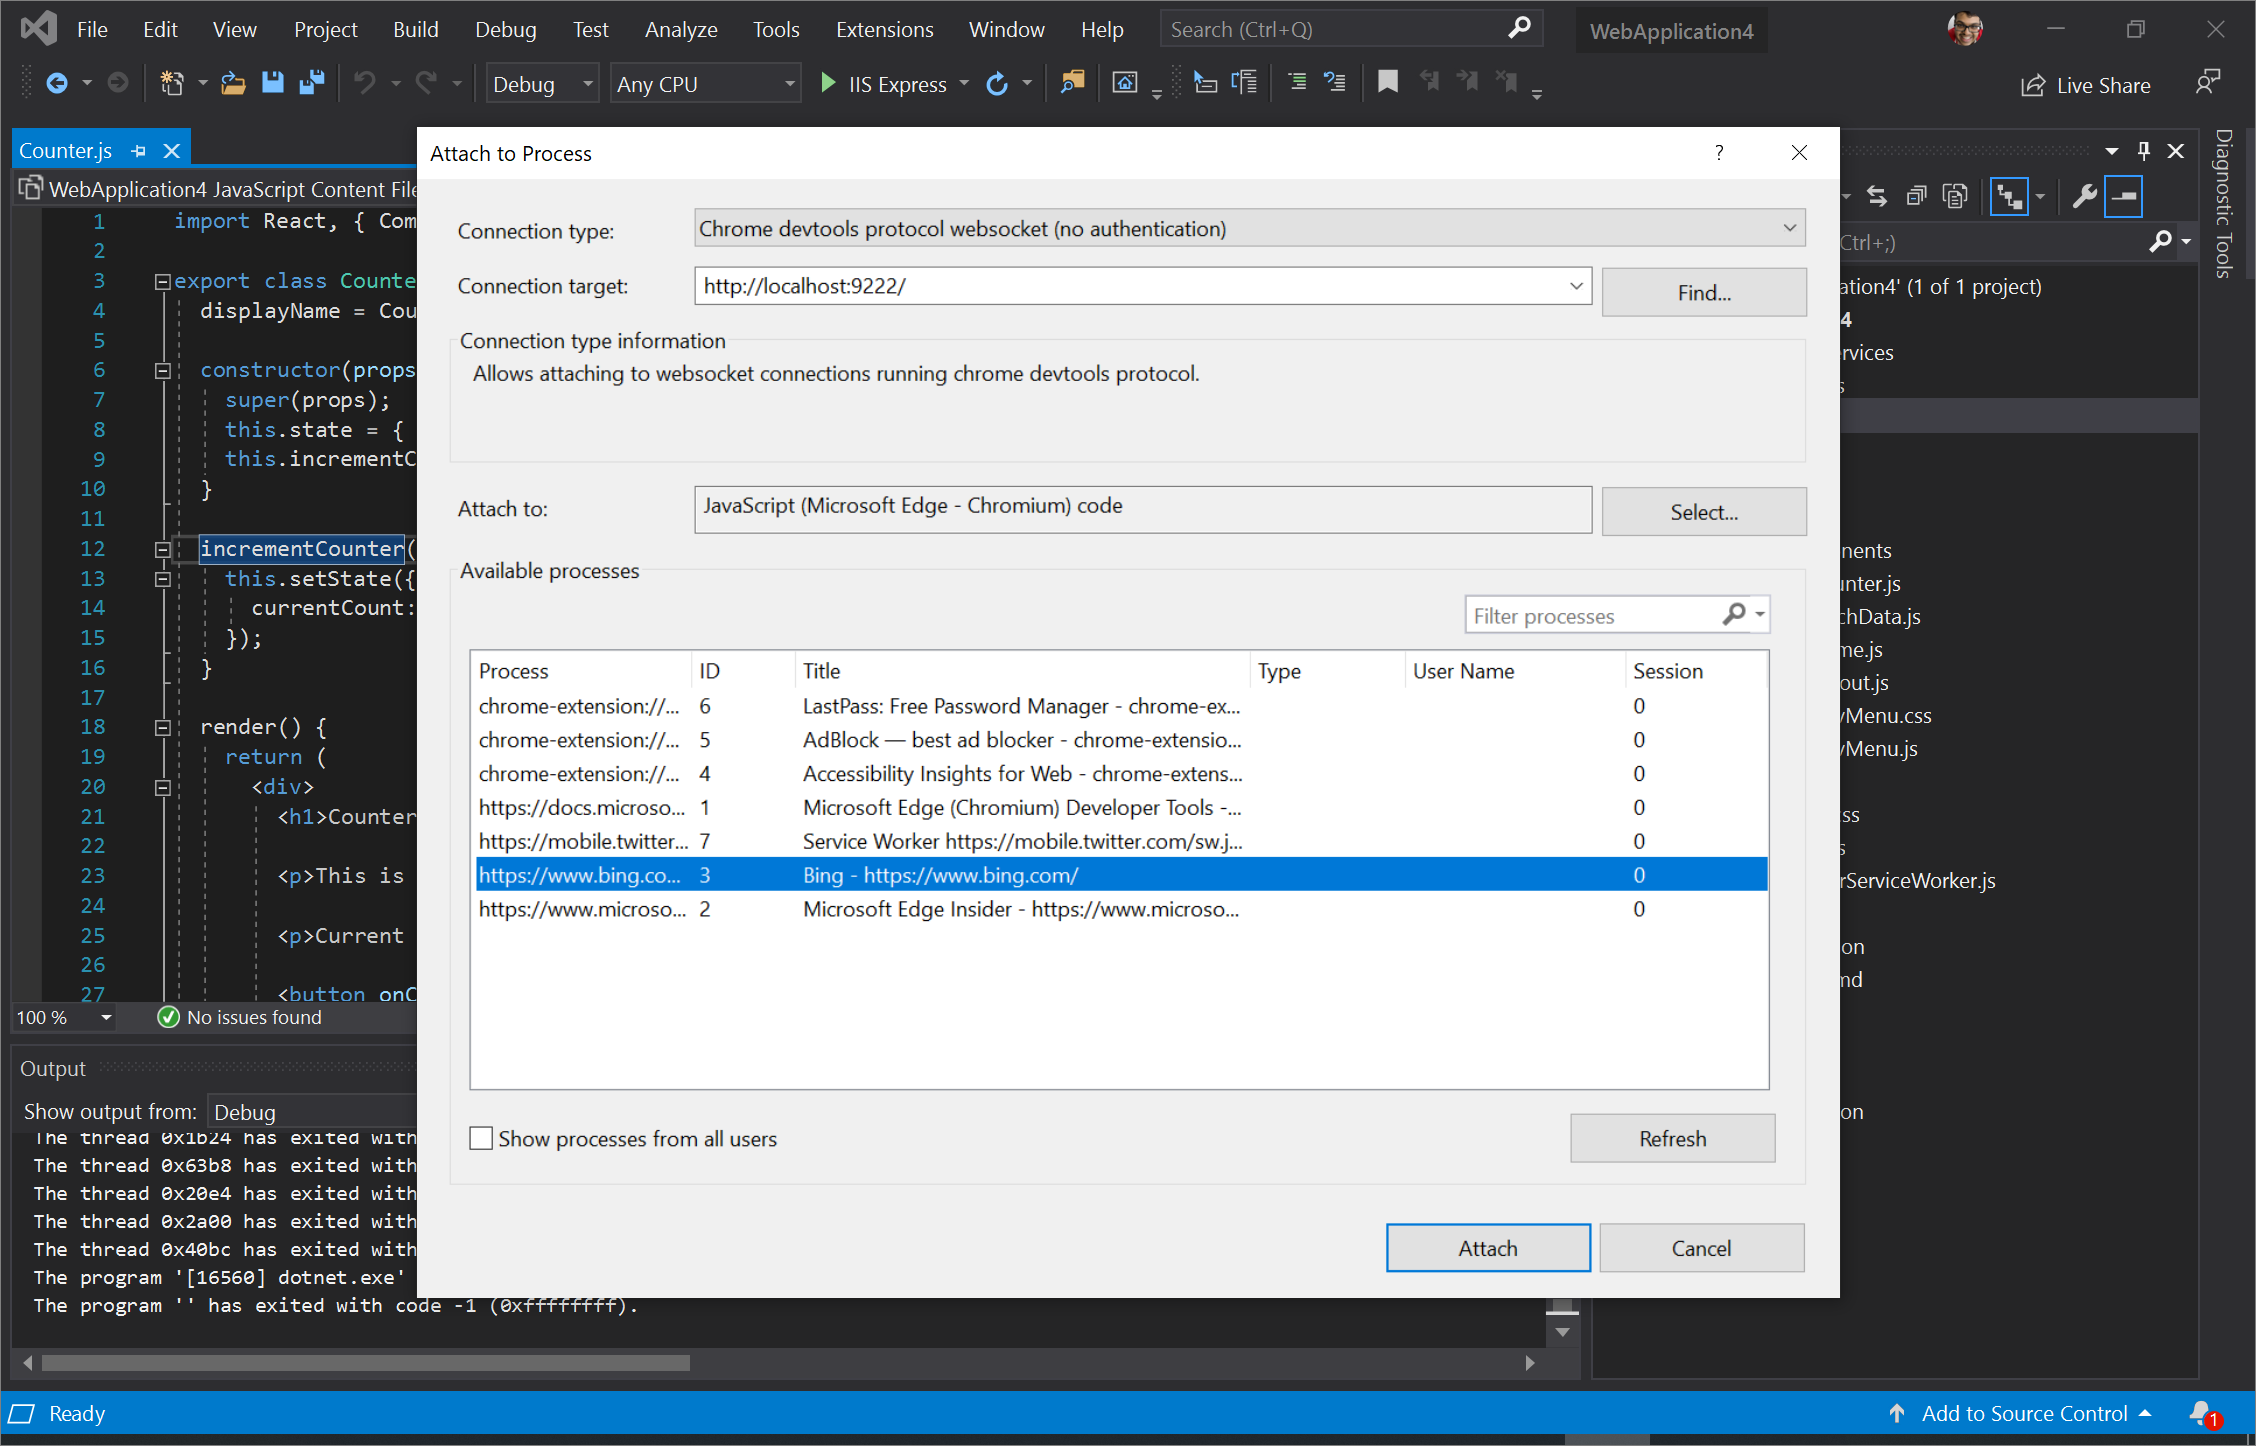 Configuring the 'Attach to Process' dialog in Visual Studio